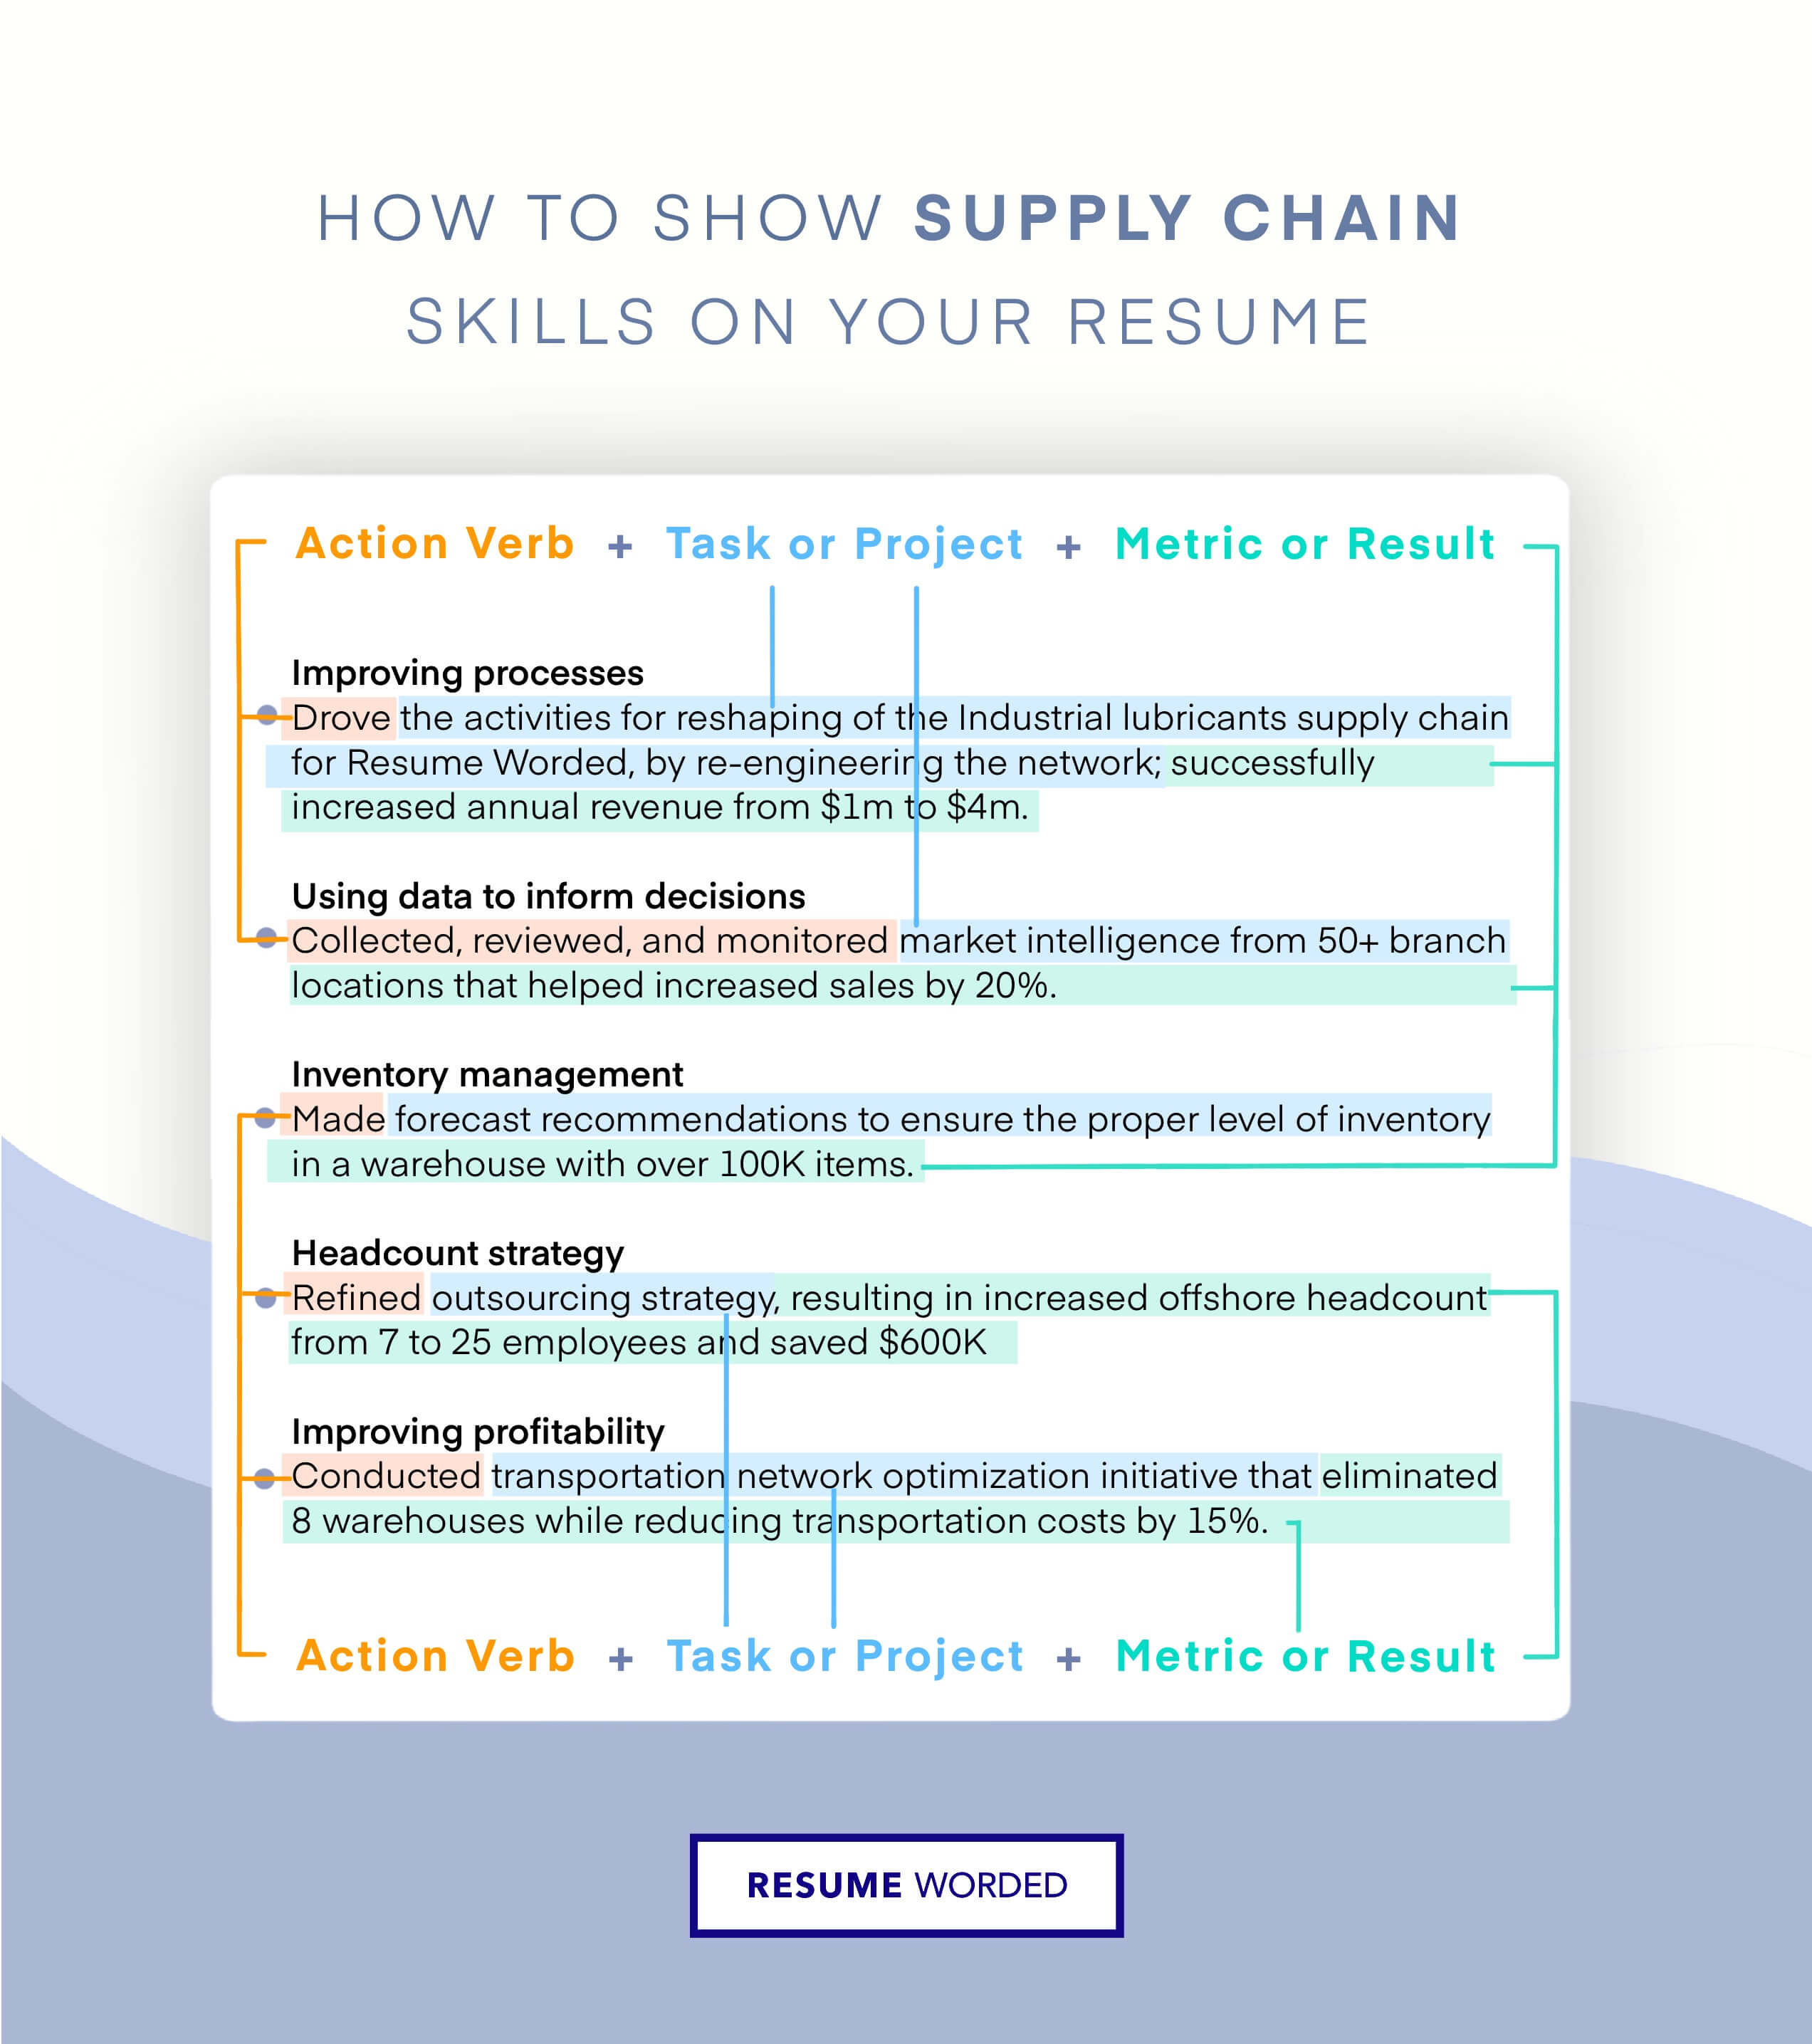 Showcase specific supply chain software proficiency - Supply Chain Manager CV